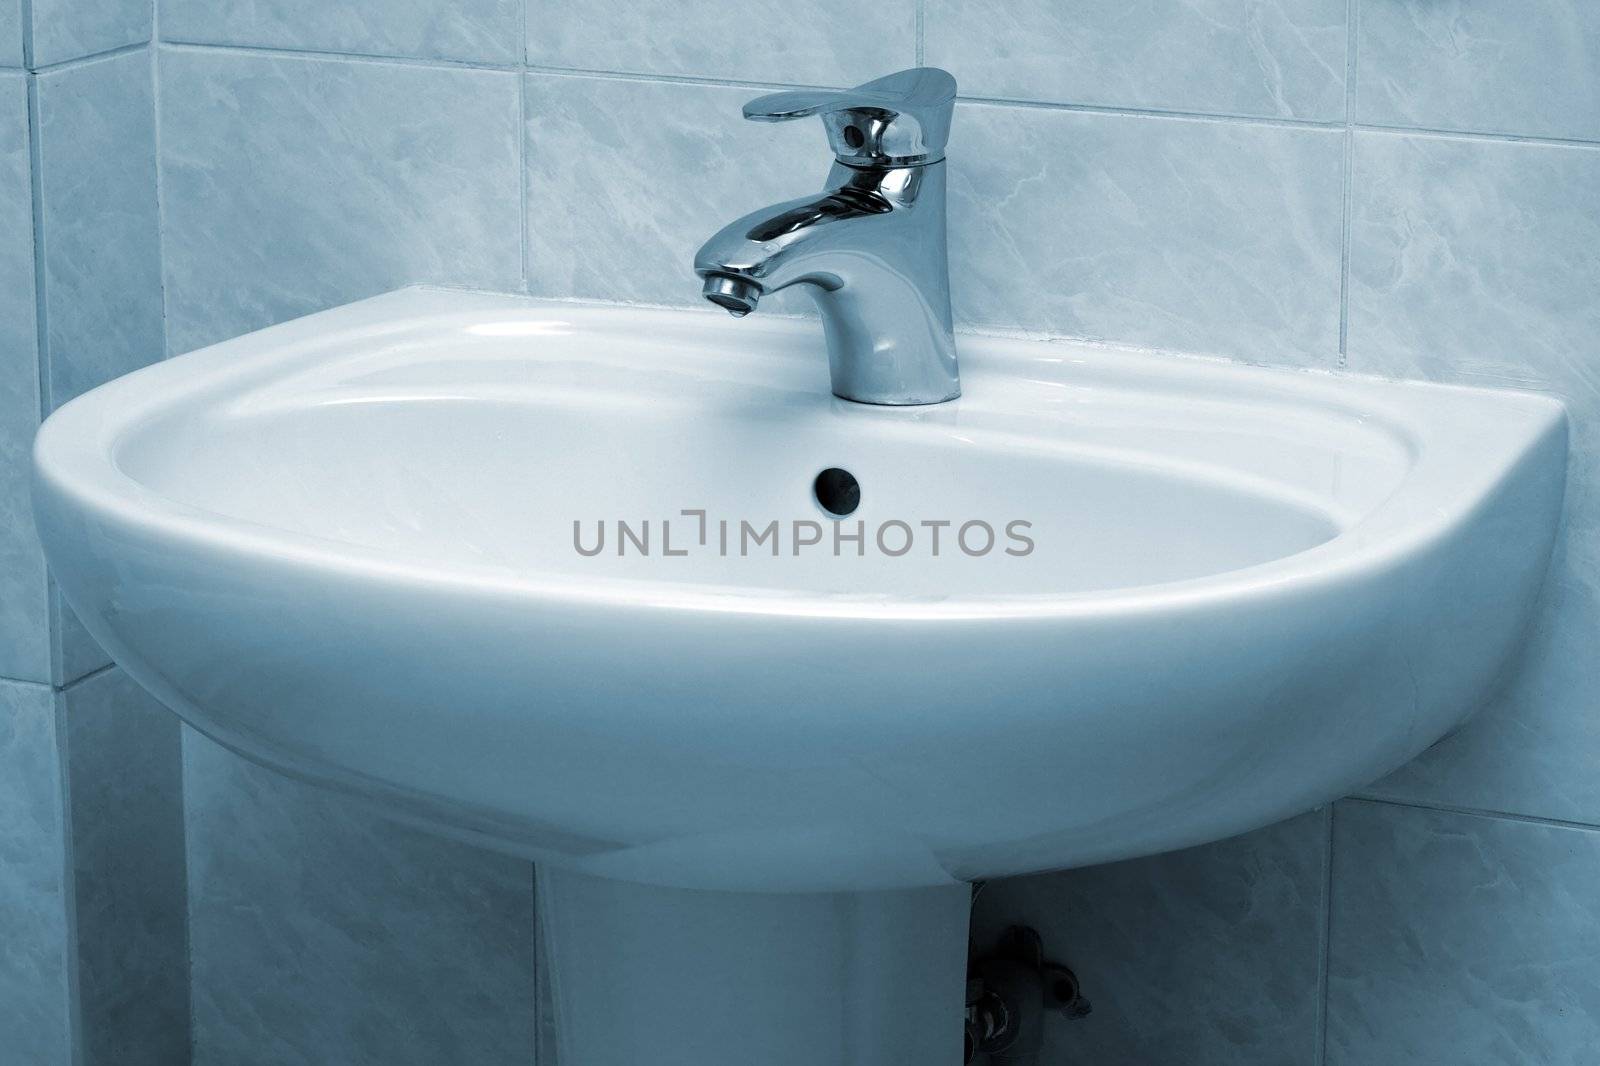 Water faucet and basin in blue tint